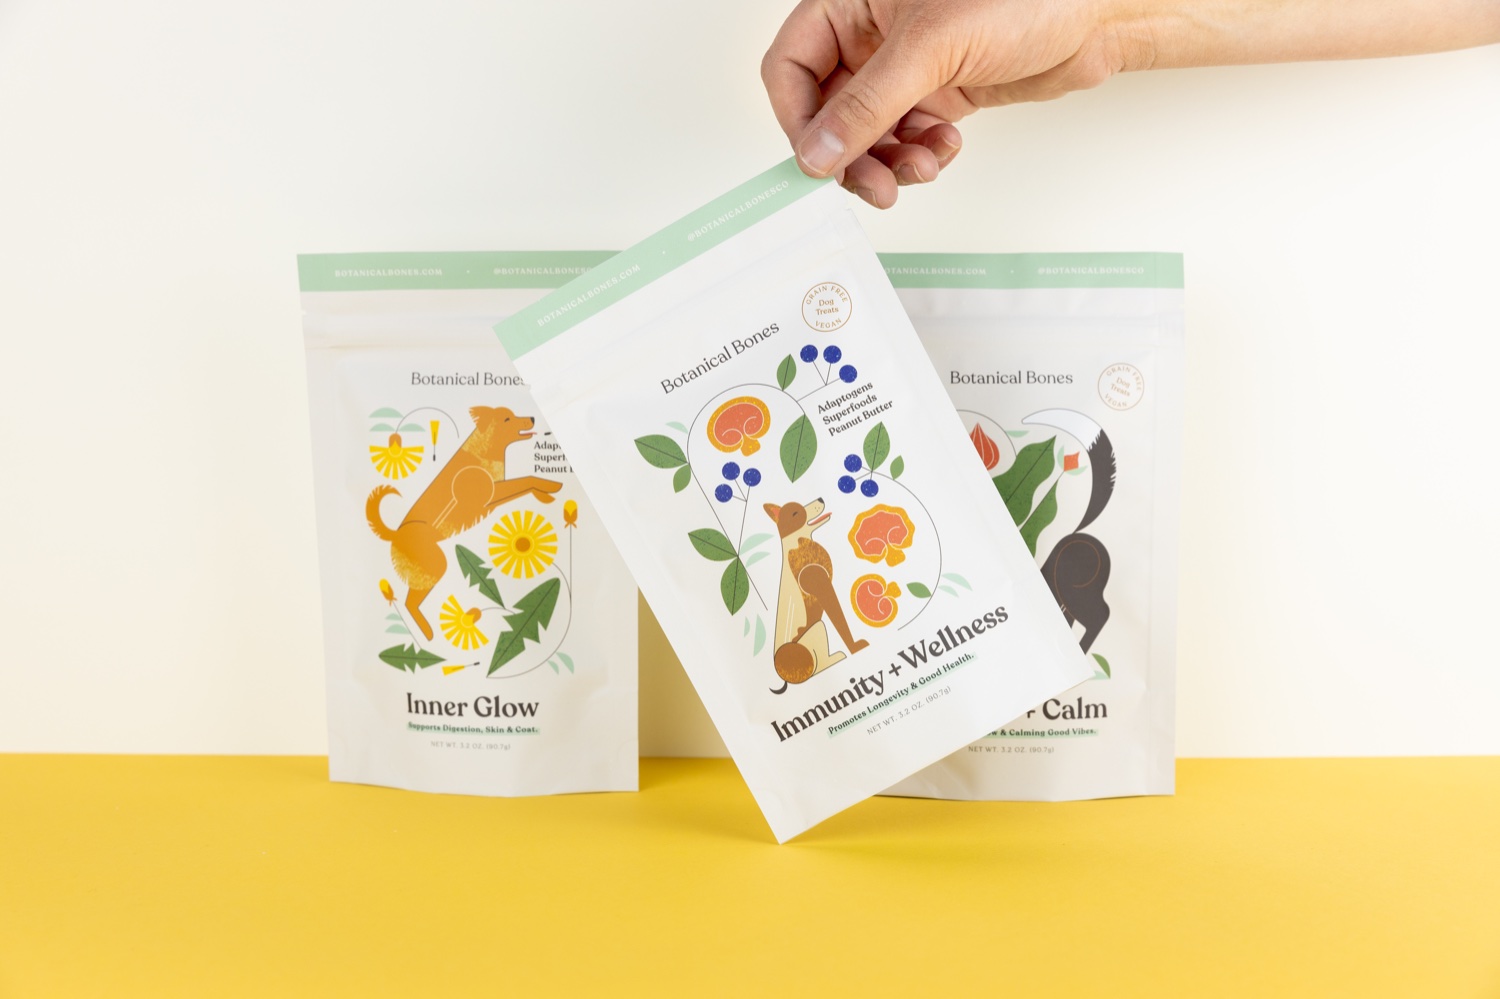 Botanical Bones: Superfood Dog Treats’ Packaging Is Contemporary Yet Timeless